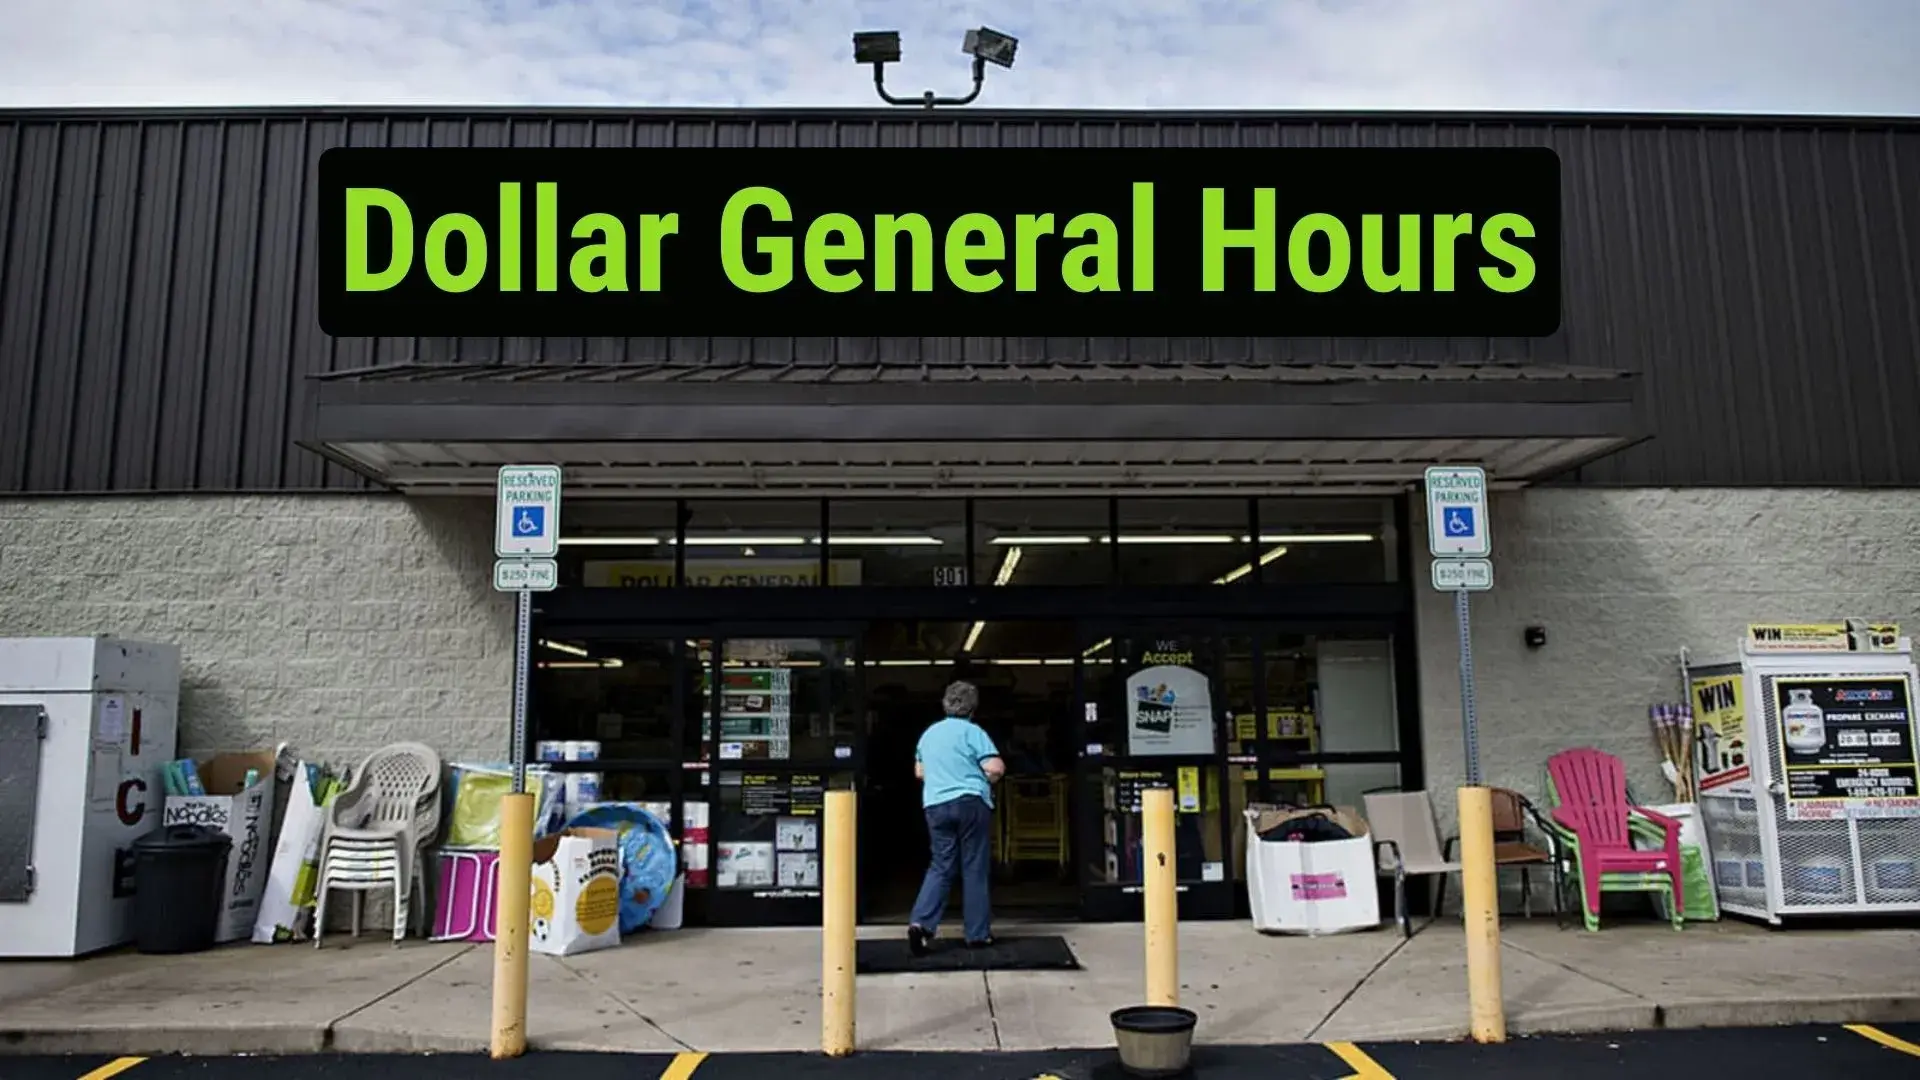 Dollar General Hours [ what time does dollar general close-open ? ]